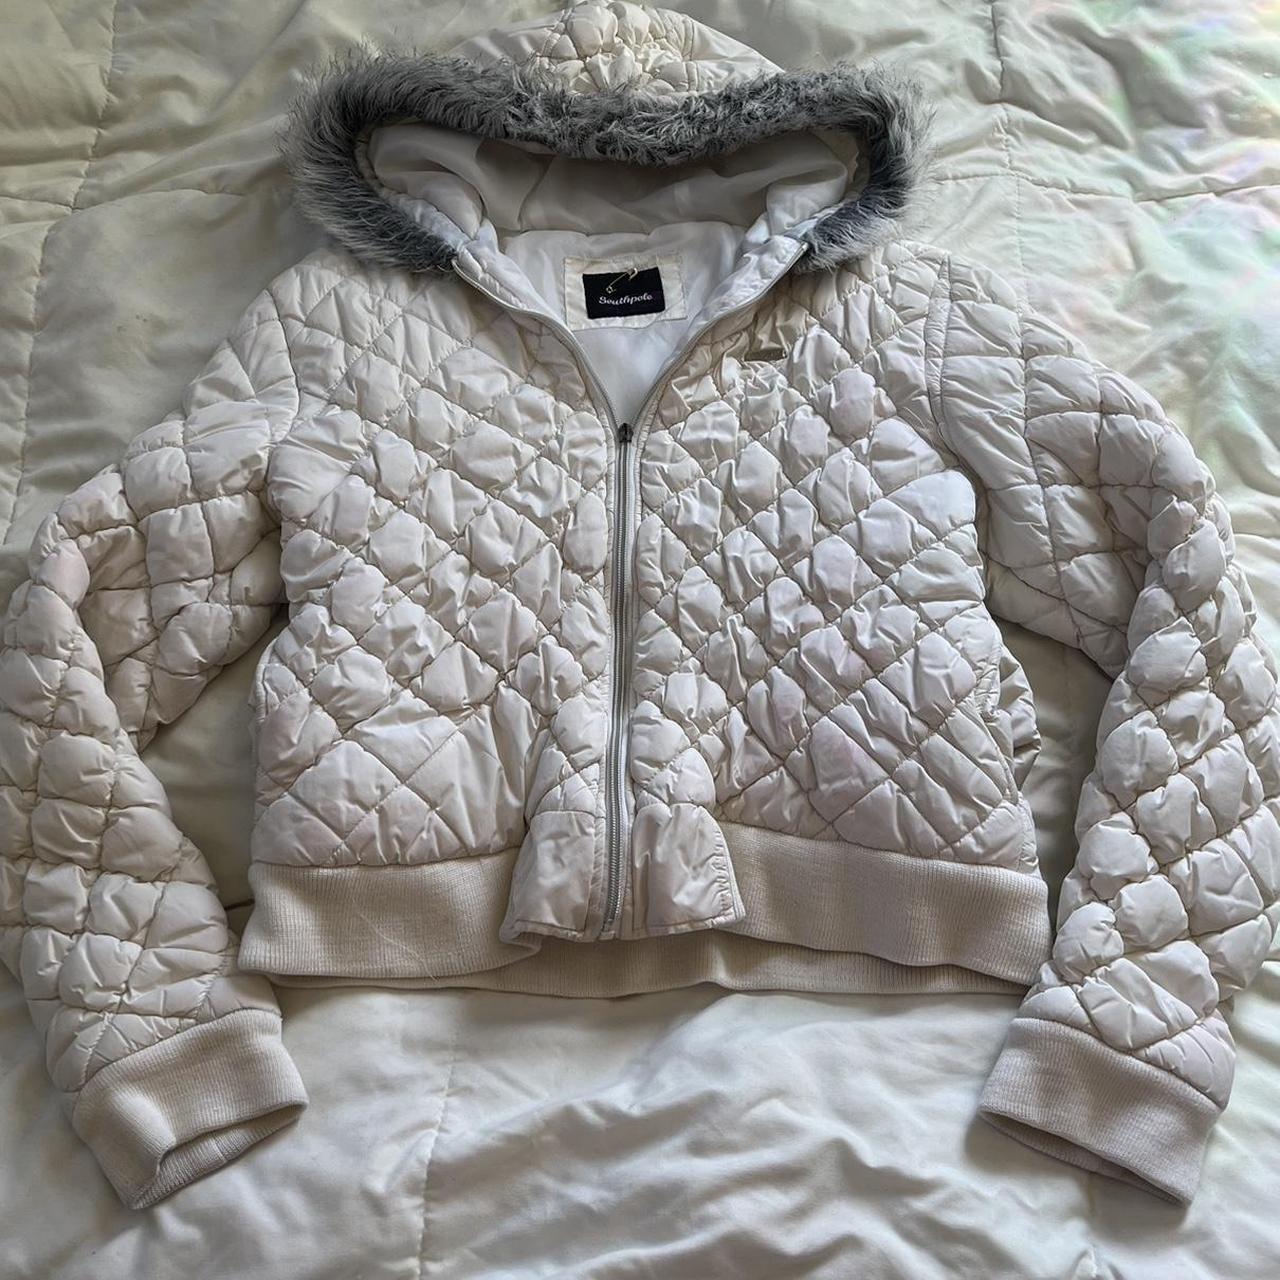 Southpole Women's White and Brown Jacket | Depop